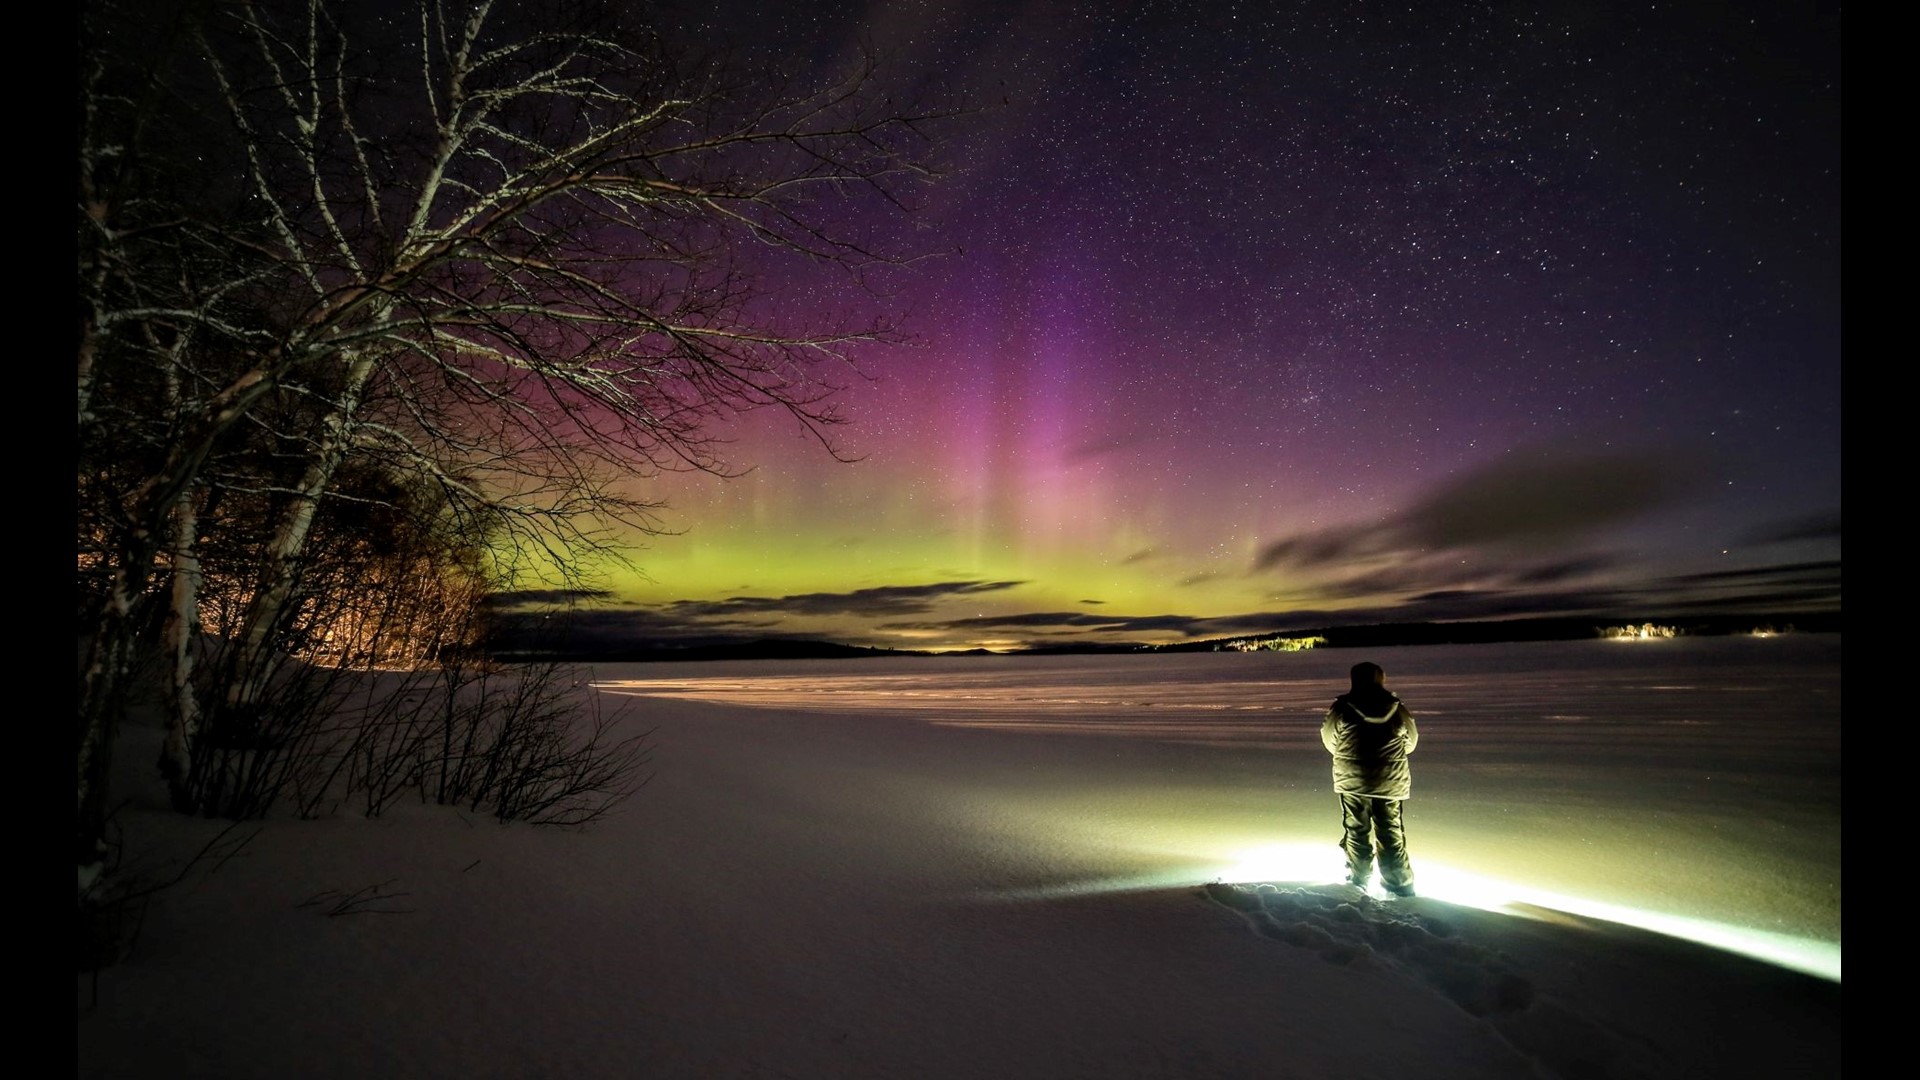 People in parts of Maine were treated to a light show Thursday night as the aurora borealis lit up the sky.